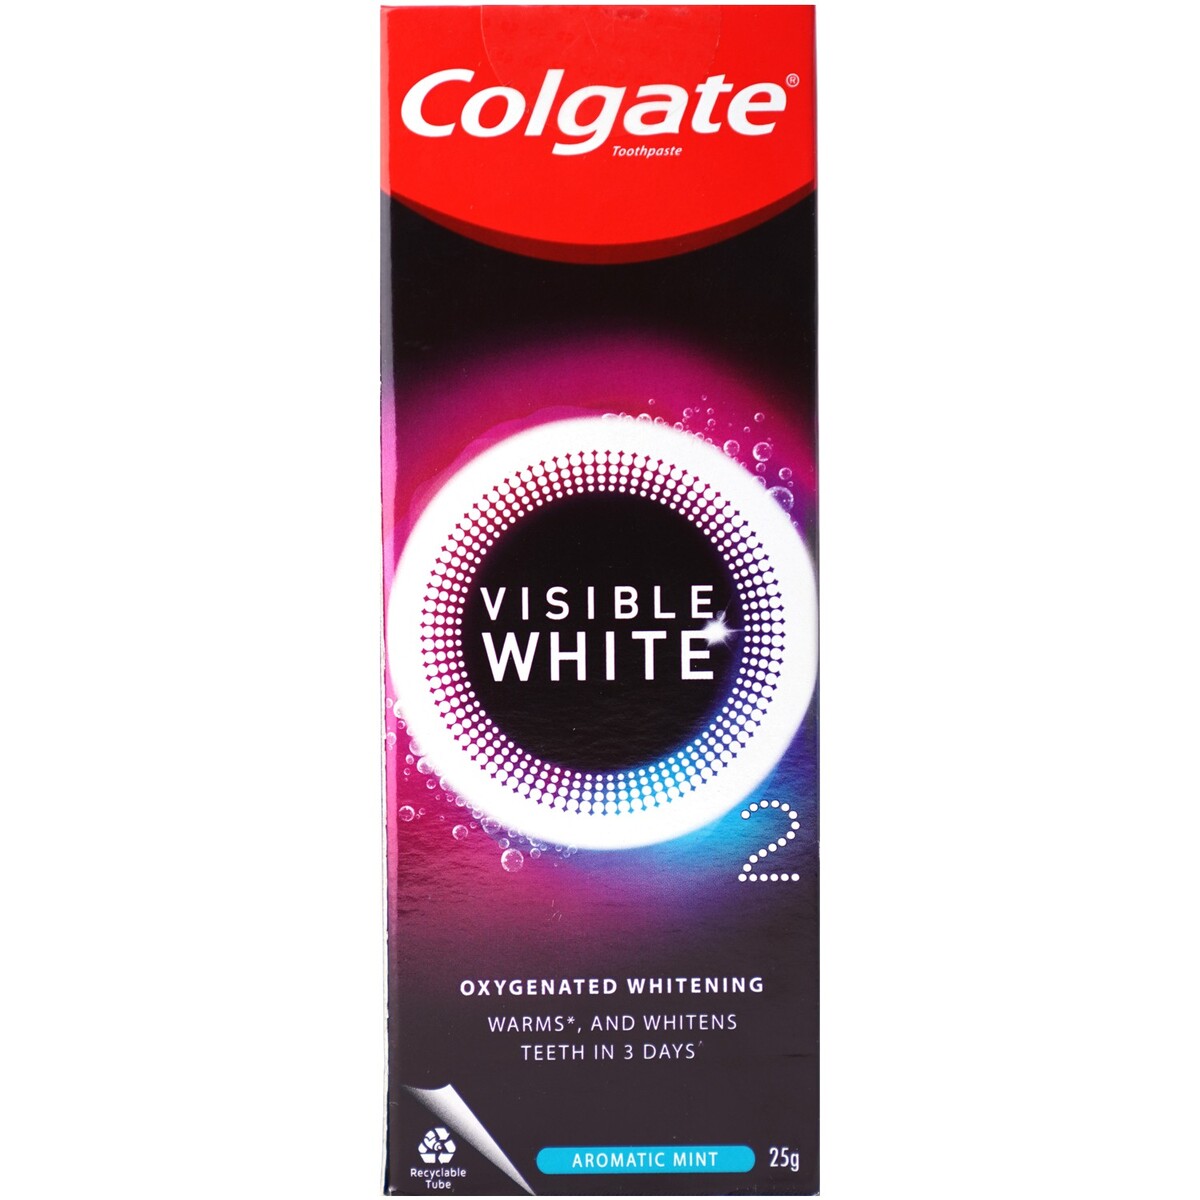 Colgate Toothpaste Visible White O2 Aromatic Mint 25g